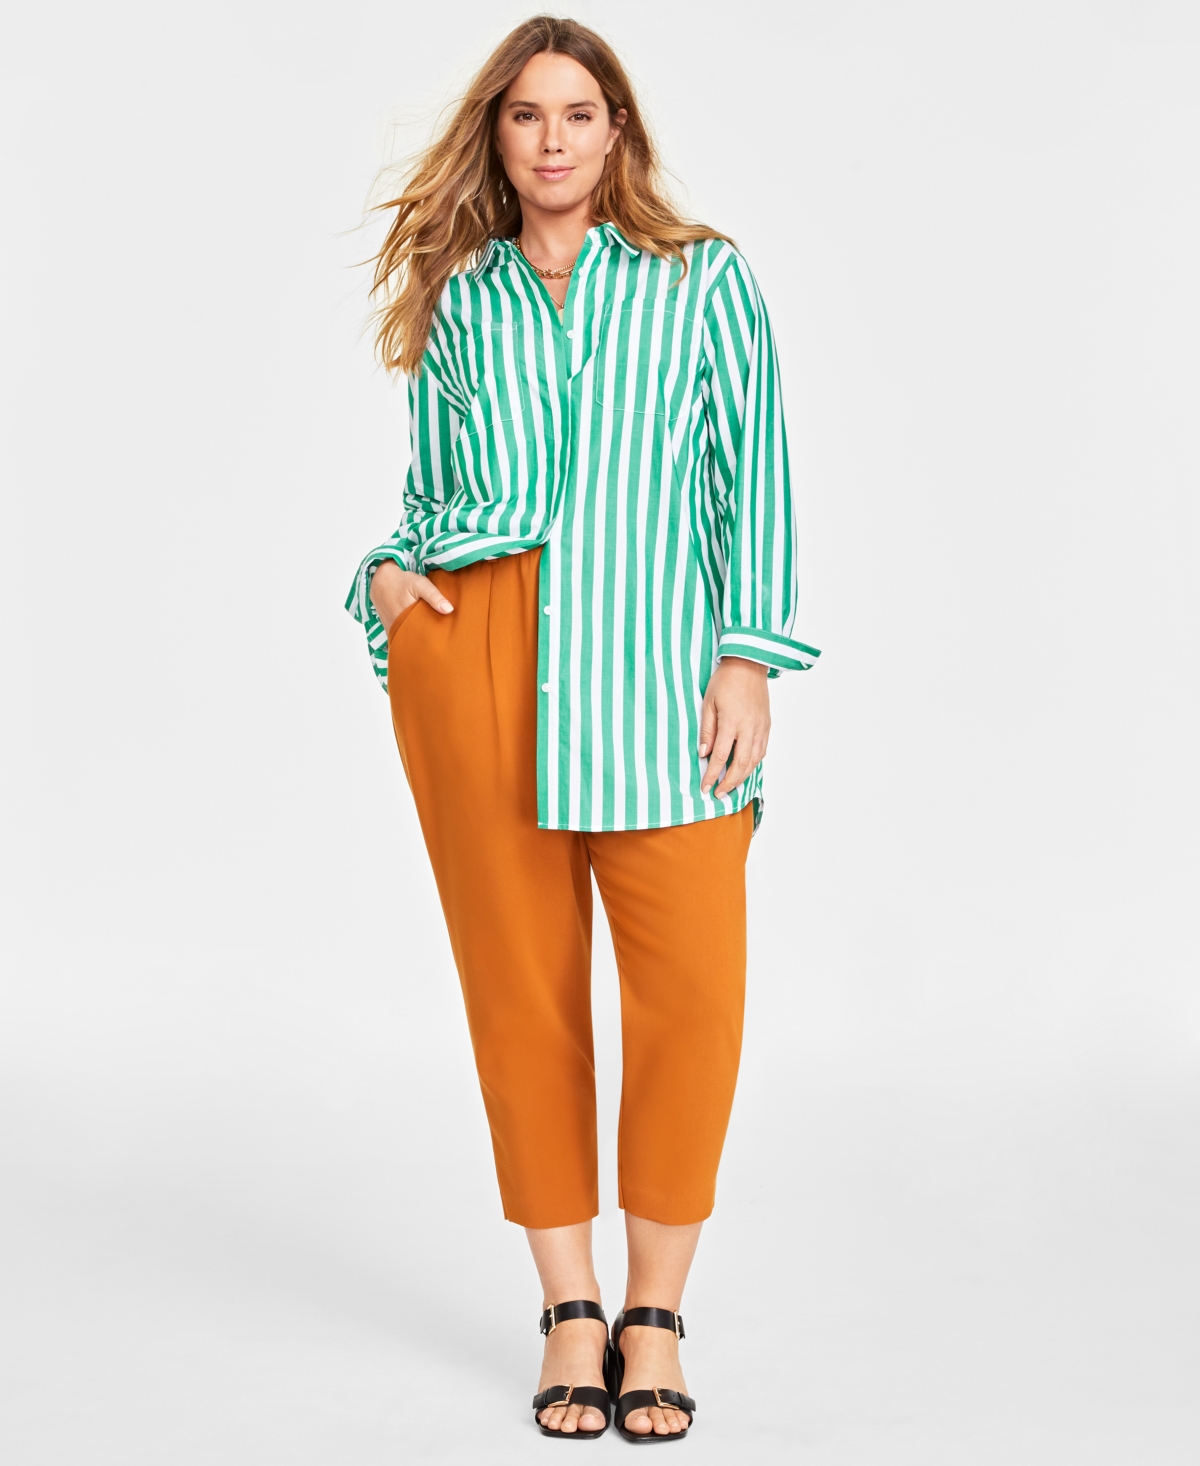 ON 34TH PLUS SIZE COTTON TUNIC SHIRT, CREATED FOR MACY'S